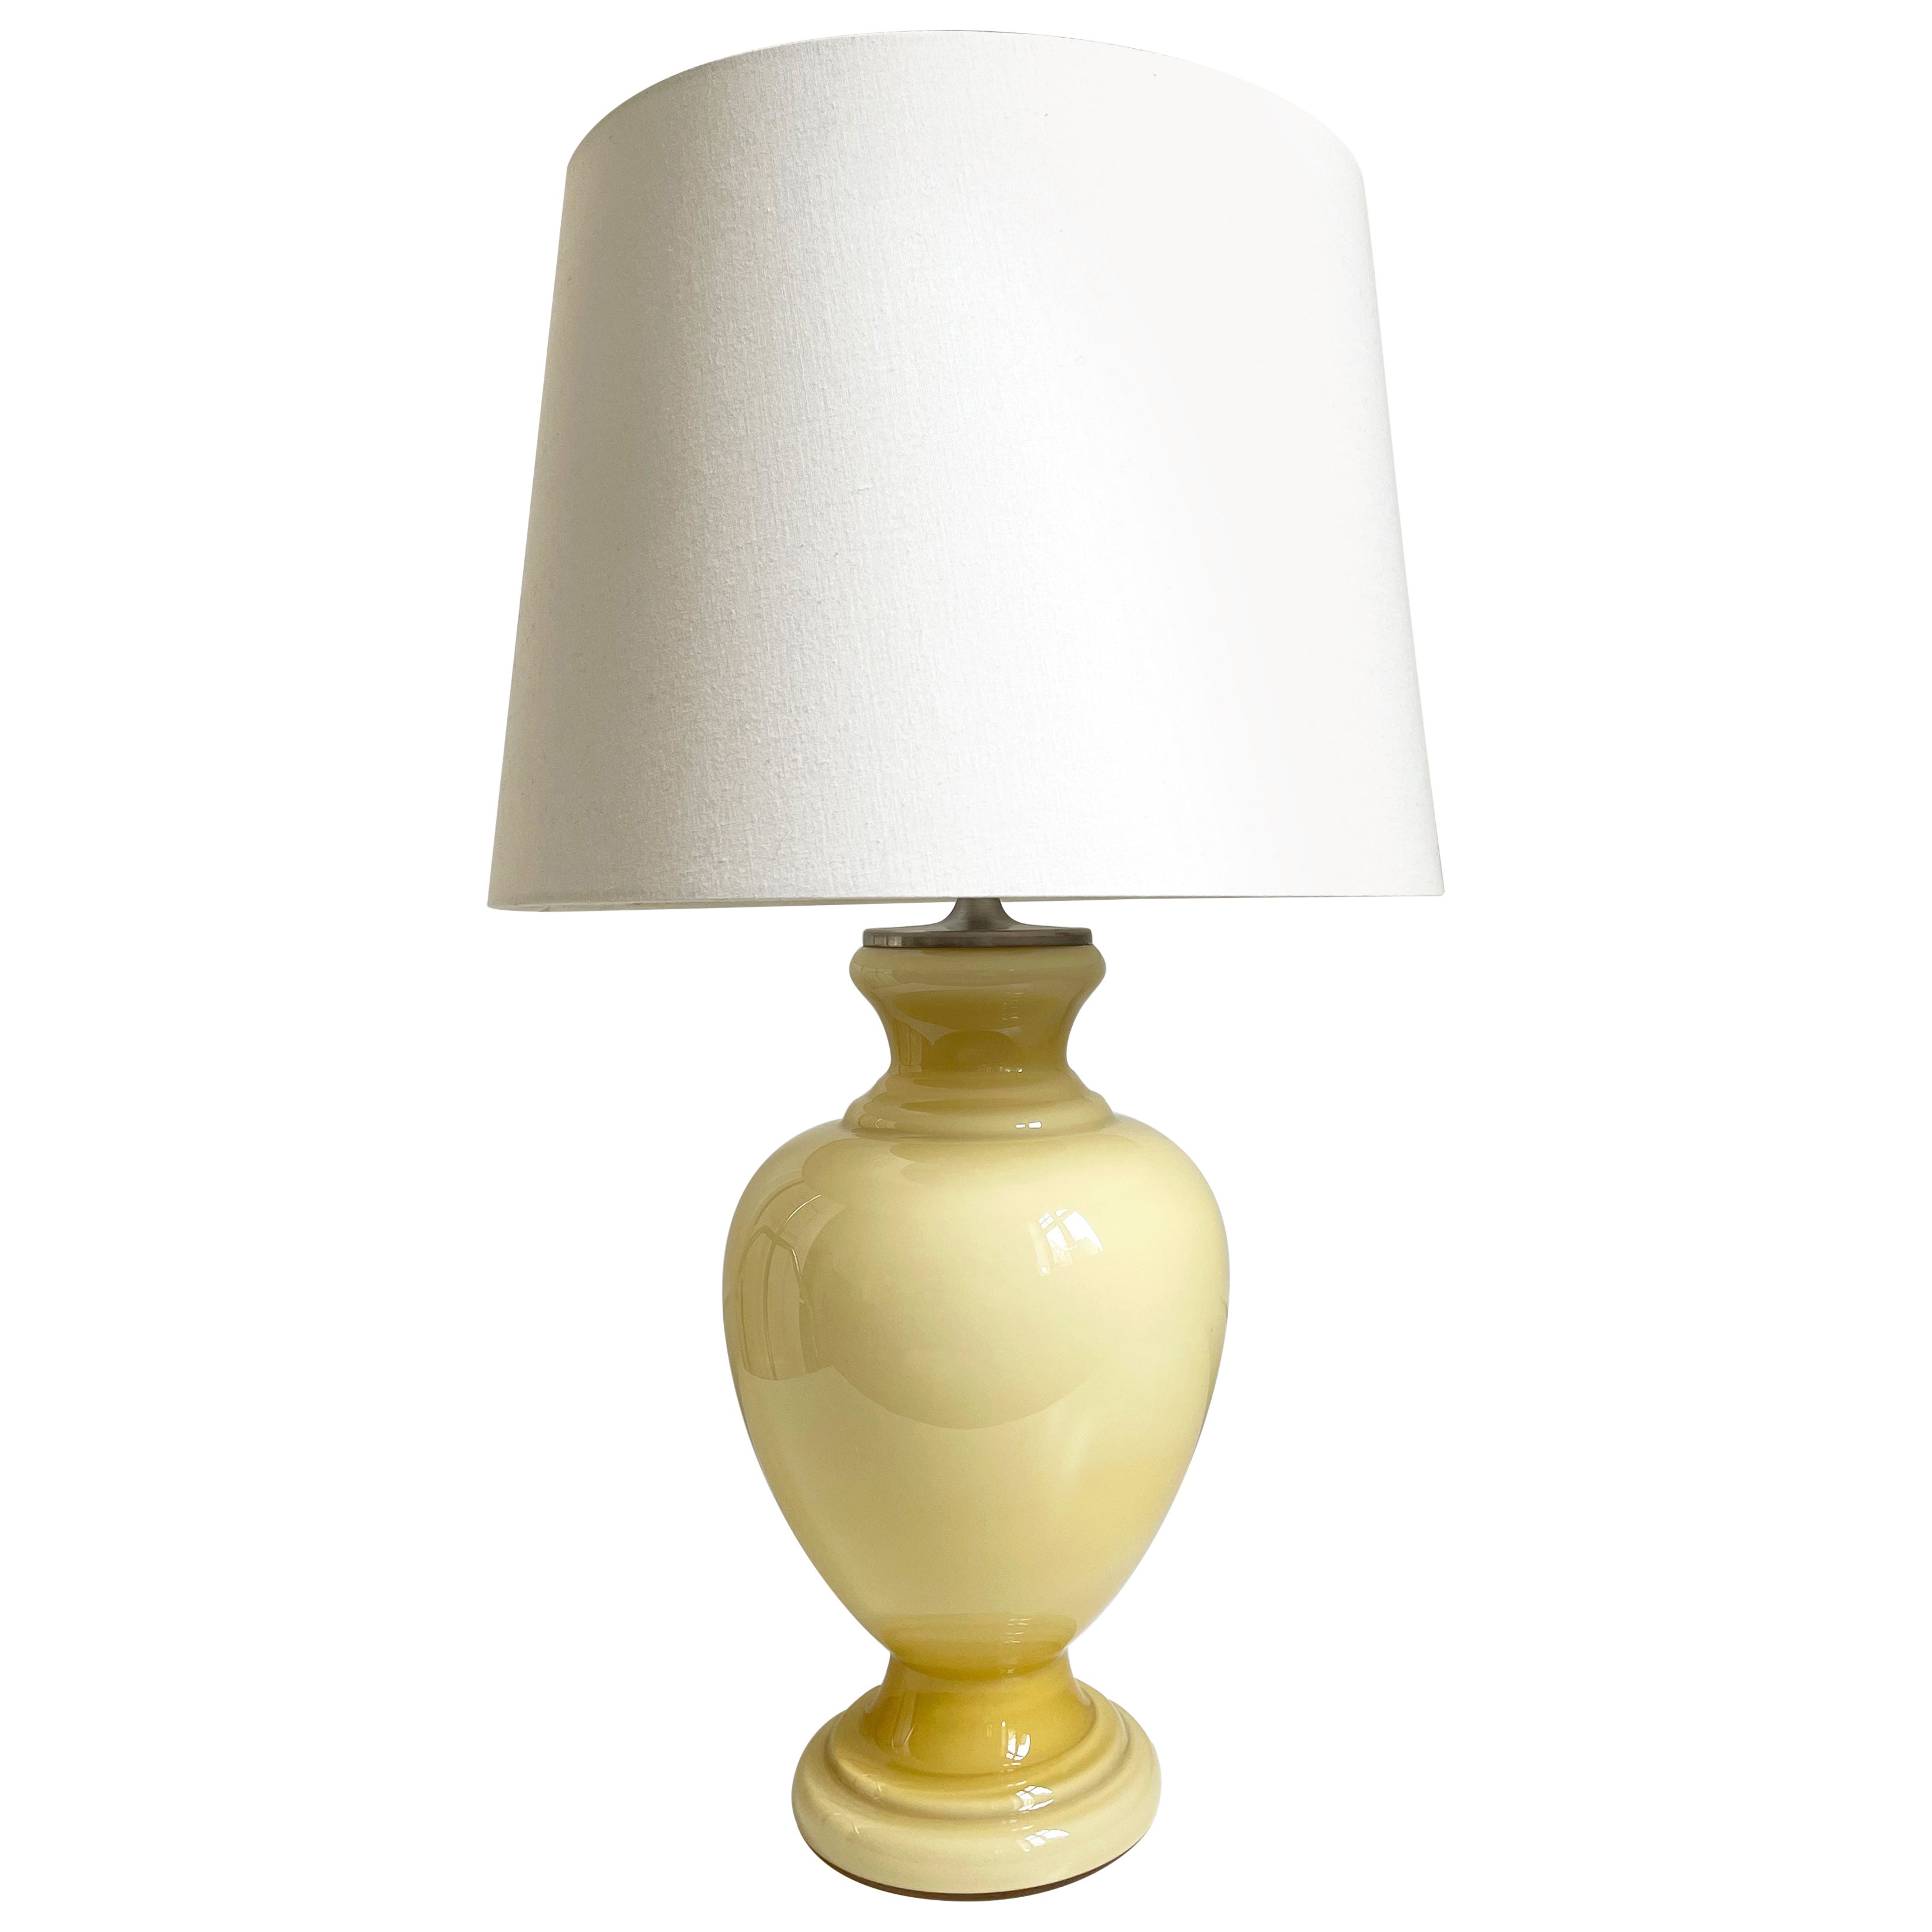 Spring Yellow Royal Copenhagen Glass Siena Table Lamp by Holmegaard, 1990